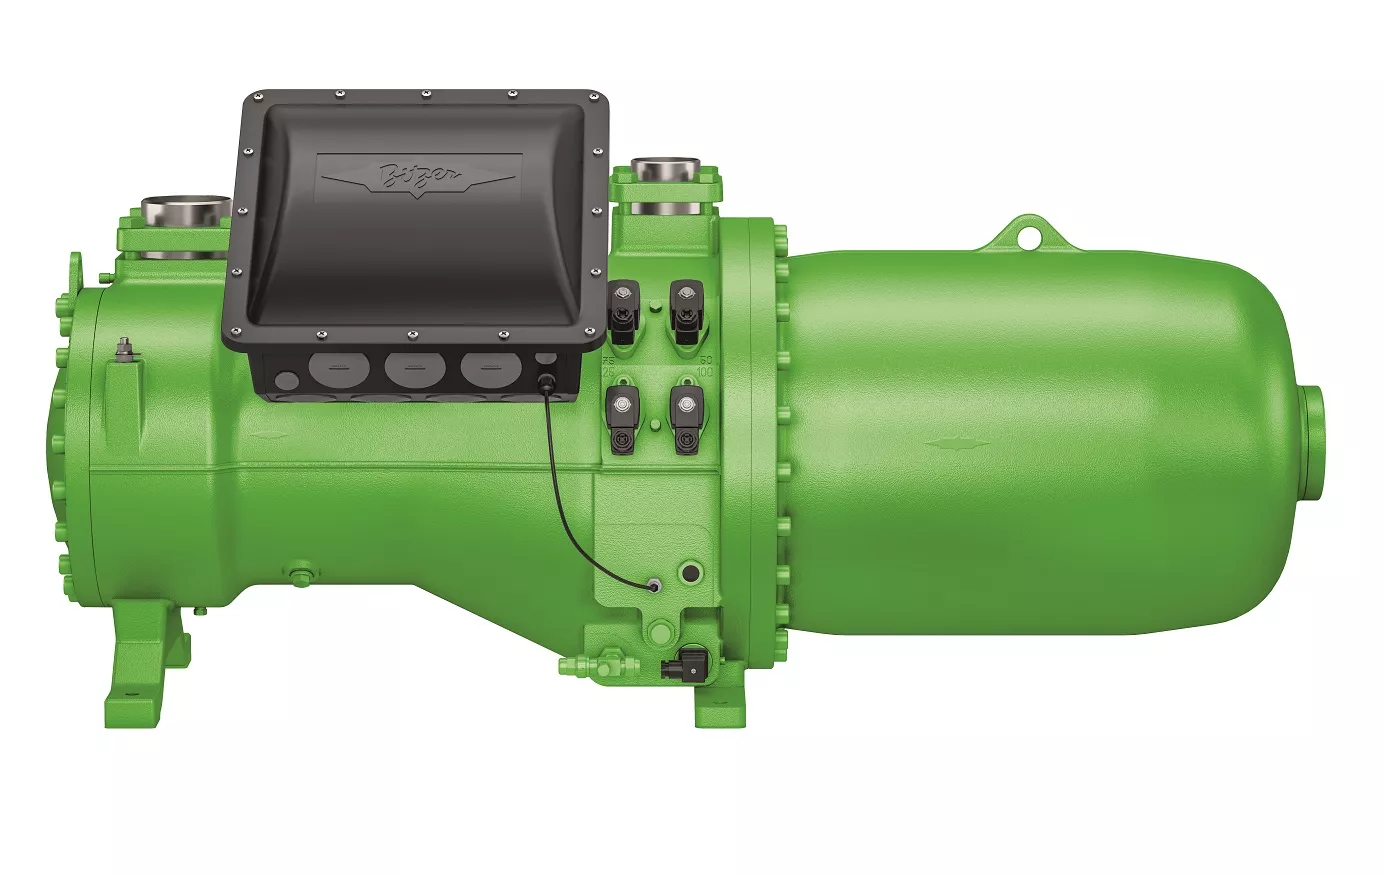 BITZER launches new high-efficiency version of CSW compact screw compressors